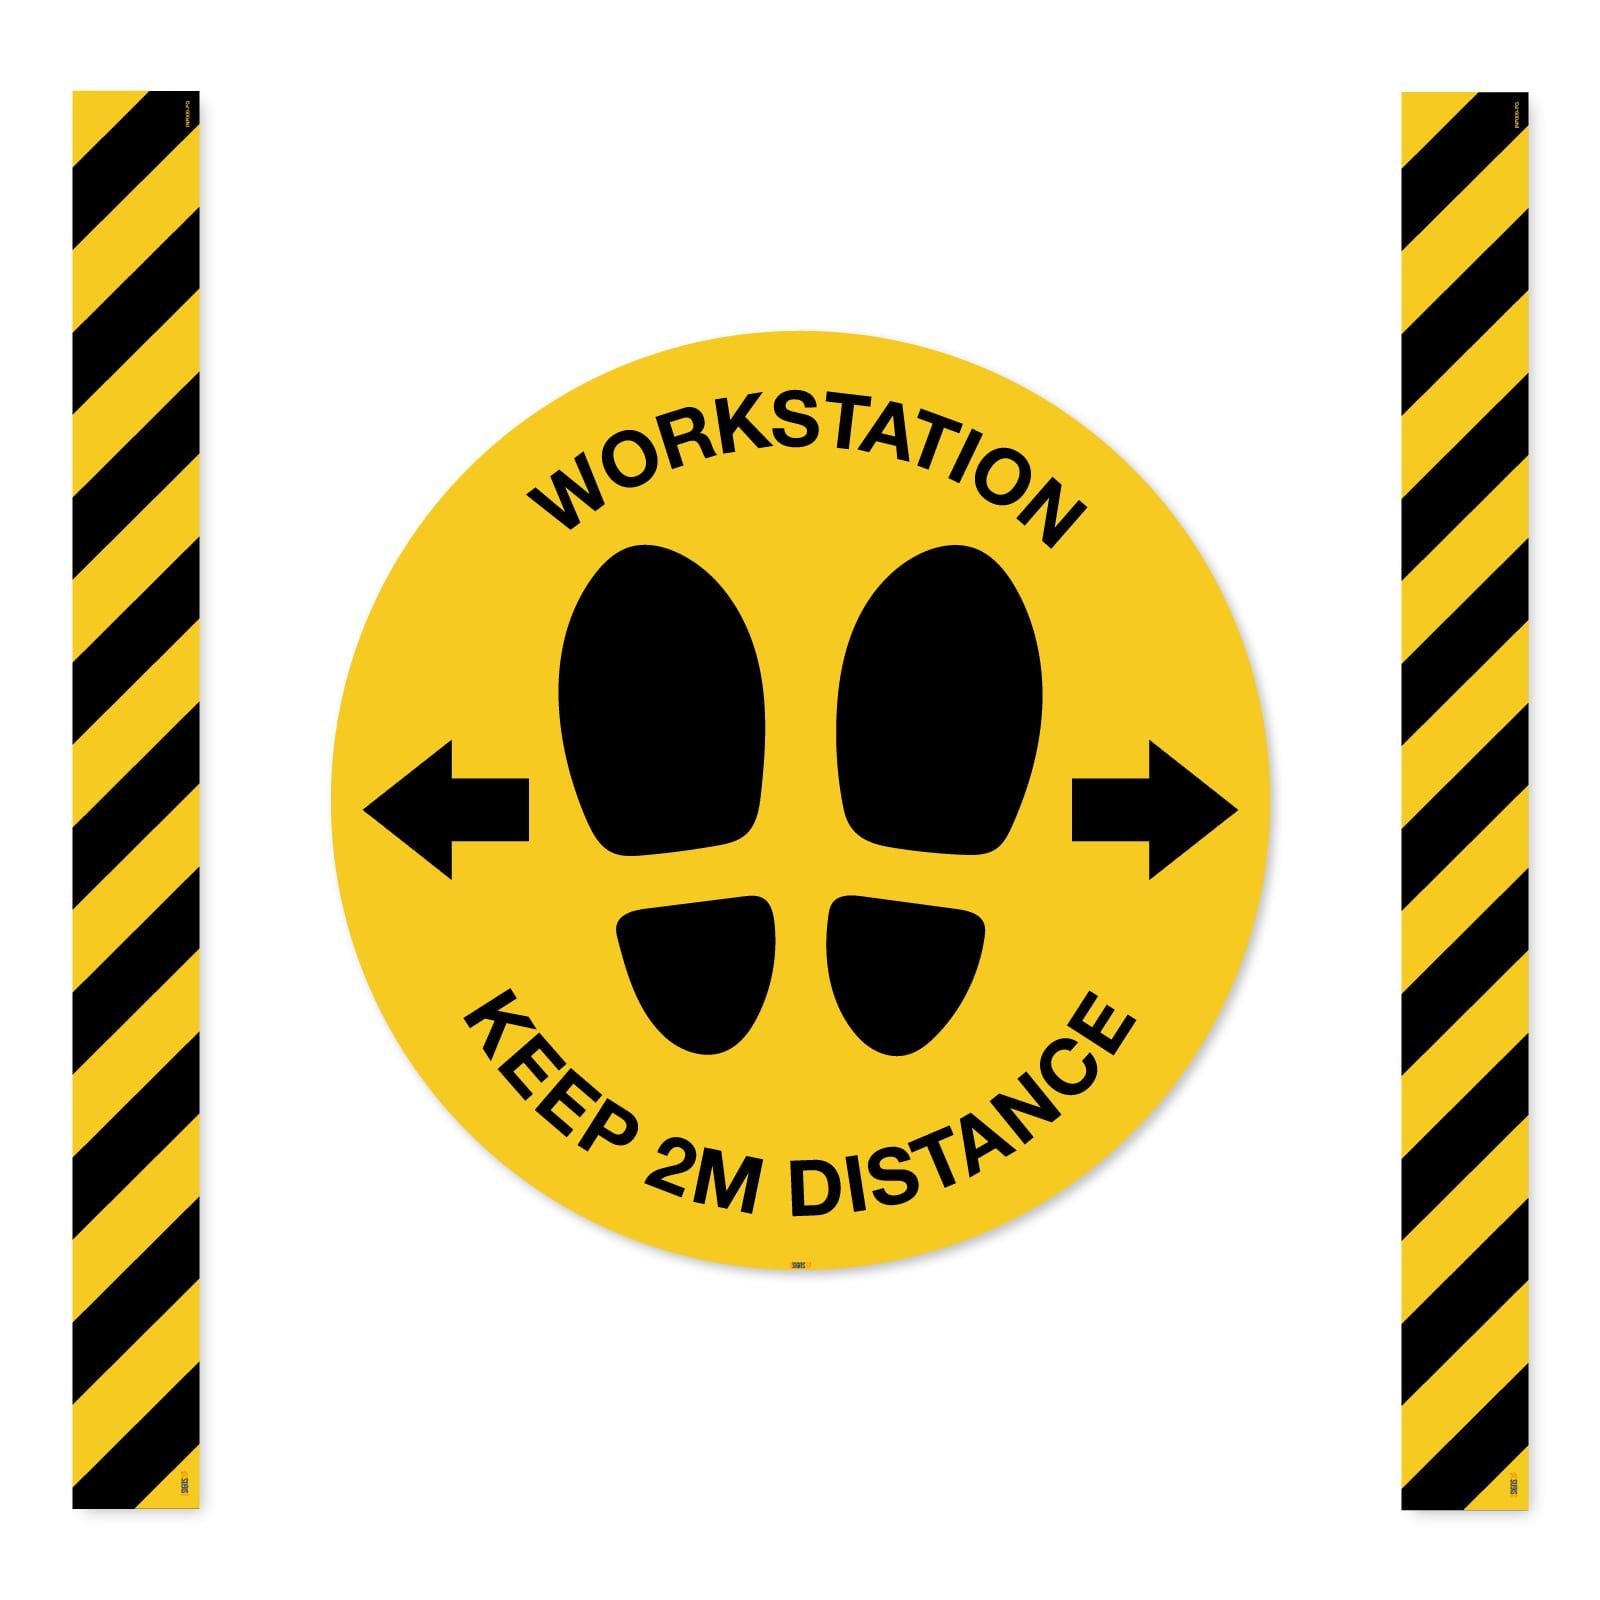 Workstation Keep 2m distance Sign Floor markers Mandatory Virus Protect Safety 